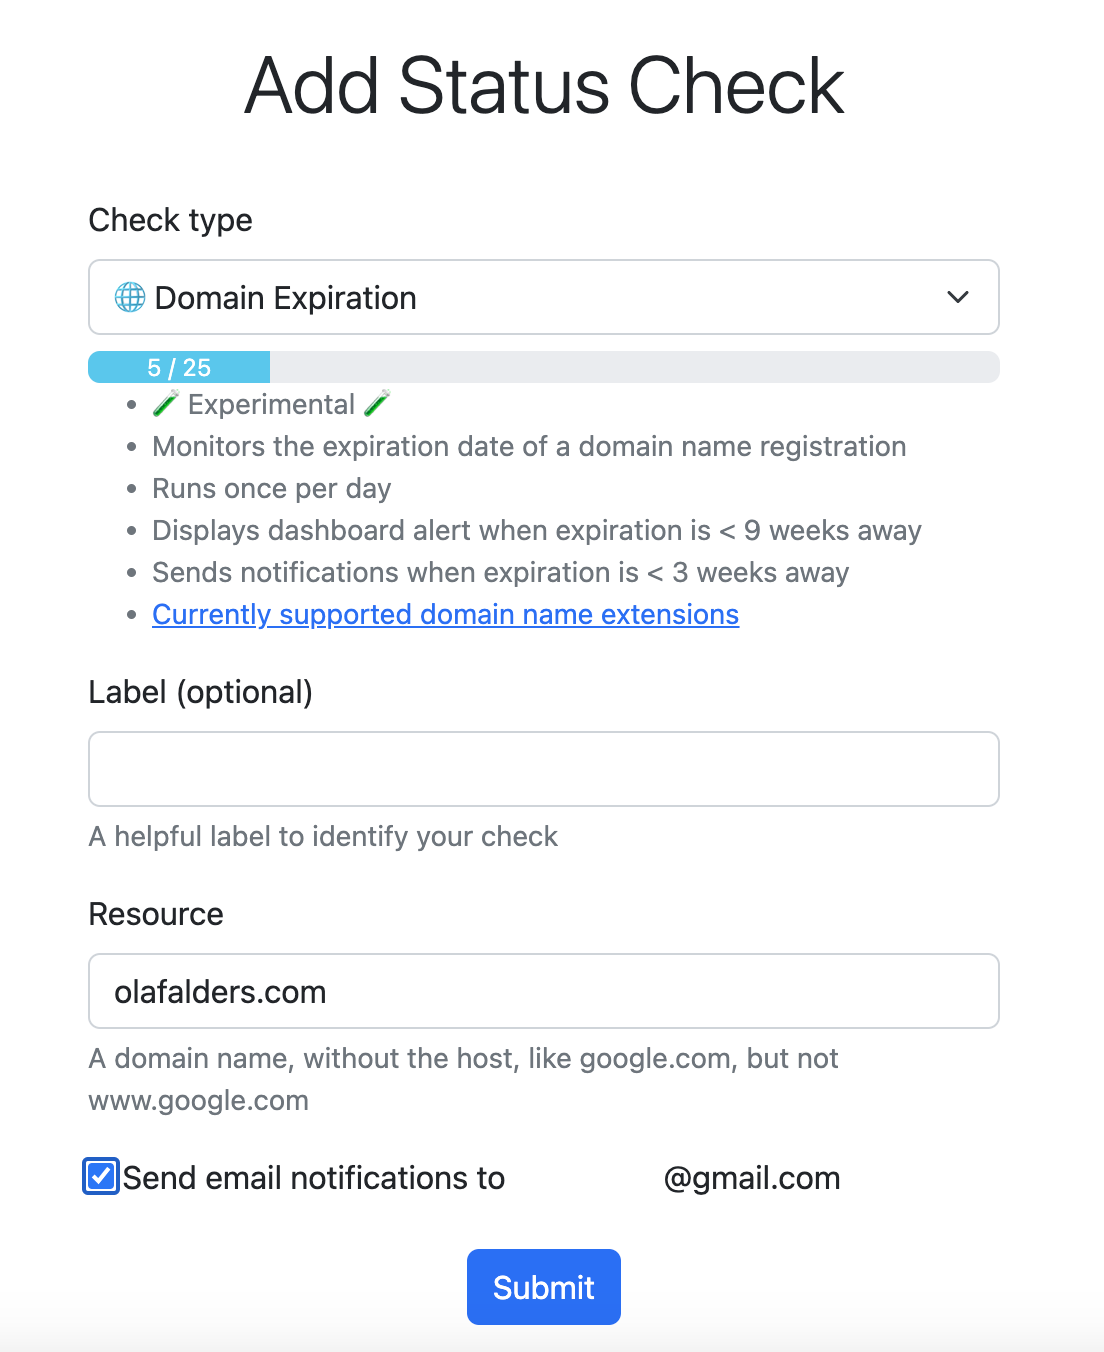 The add domain name status check form